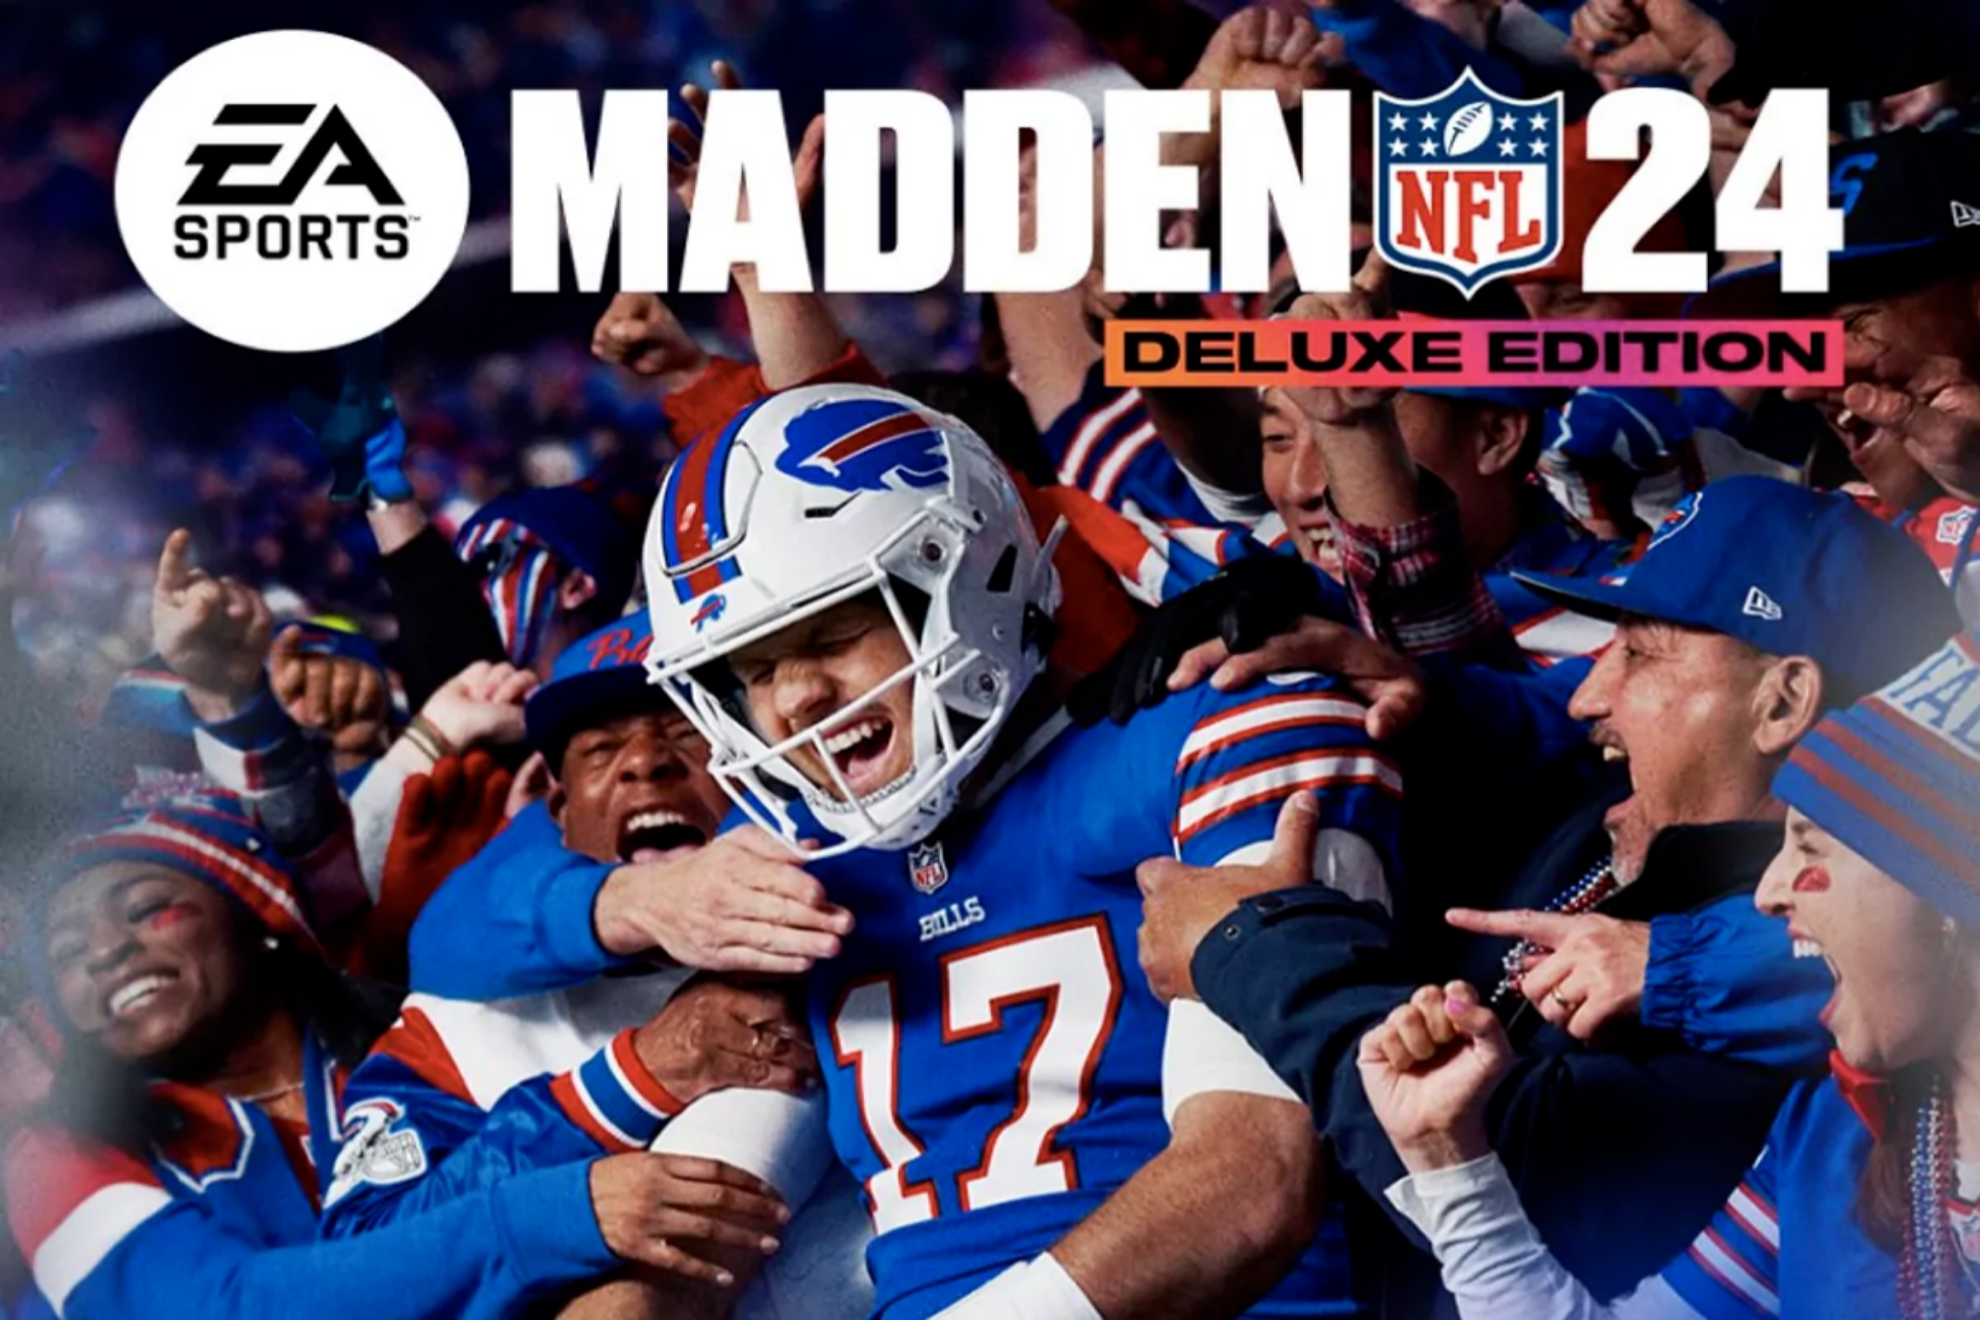 cover of madden 13